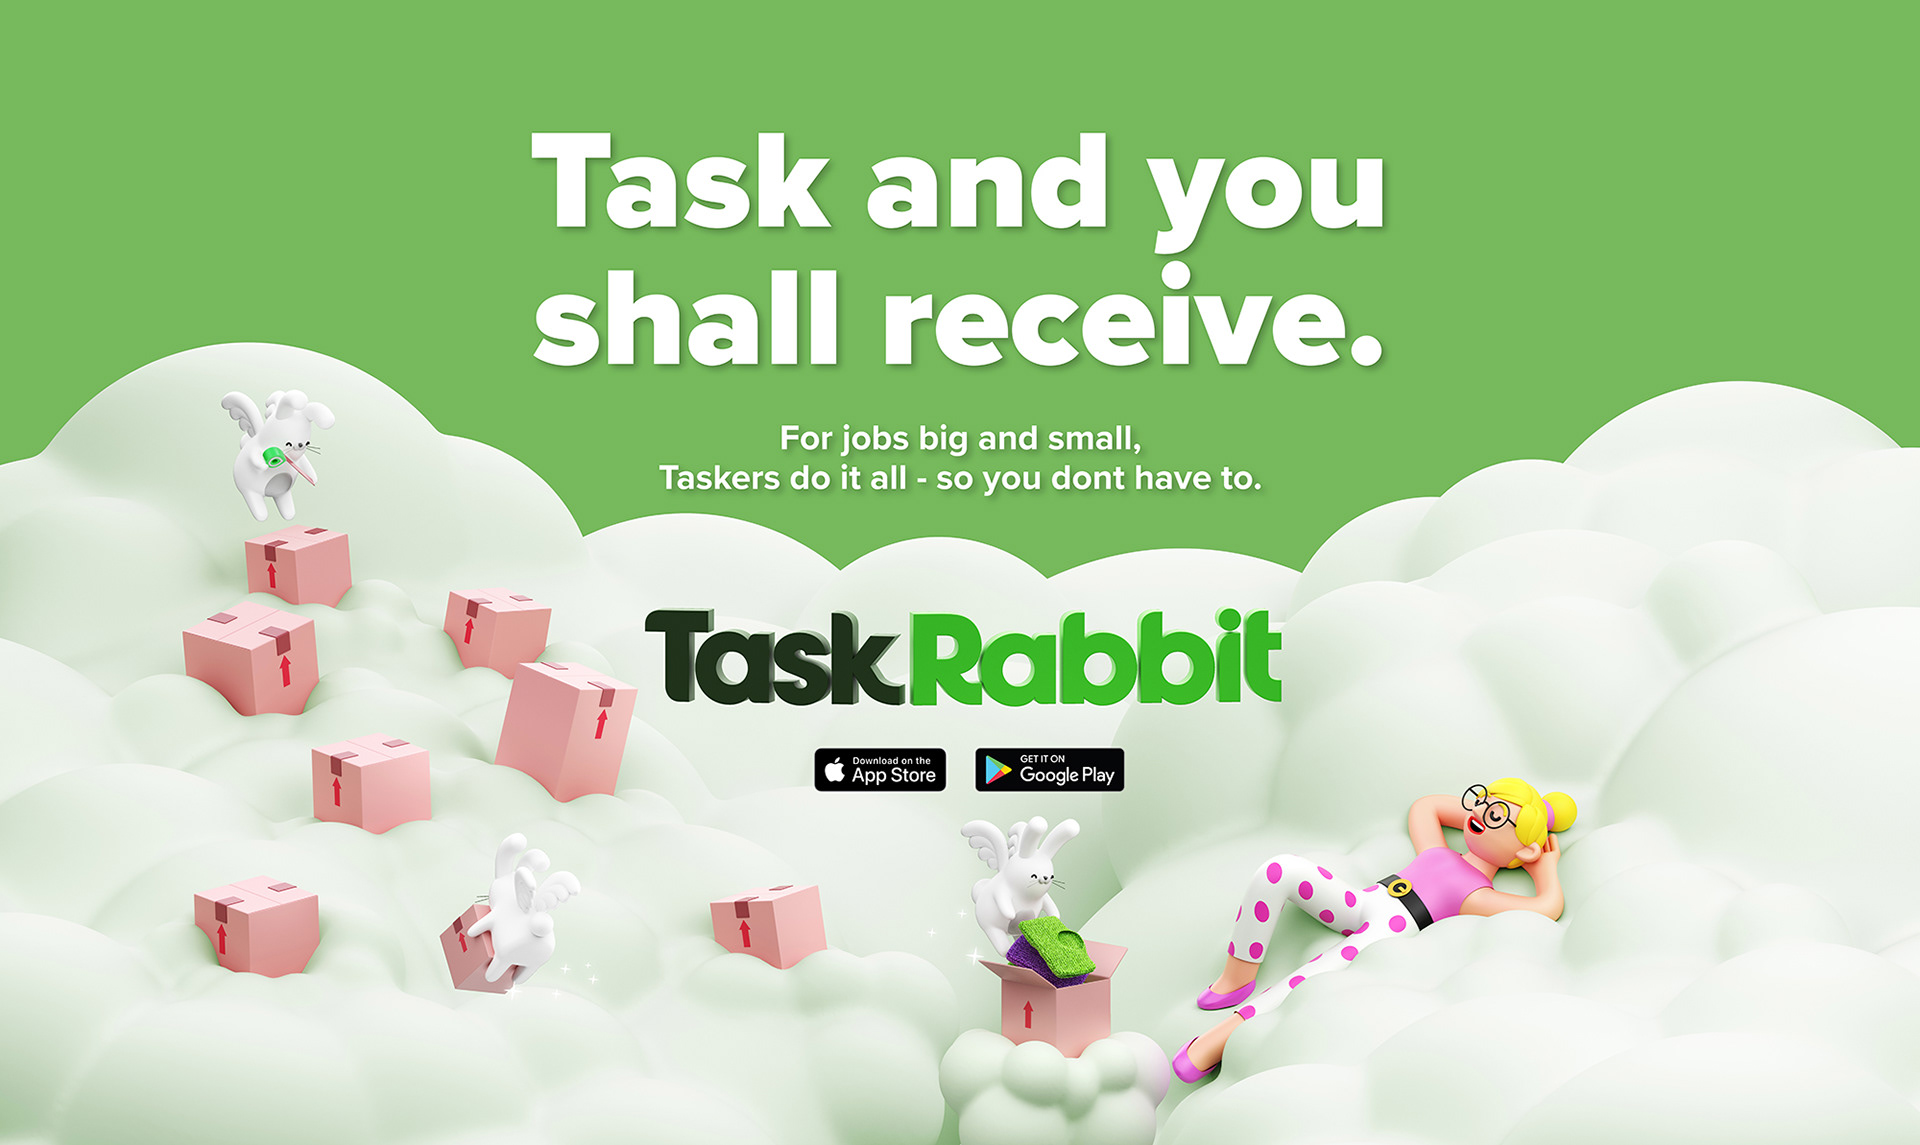 Task Rabbit - Task and you shall receive. on Behance67d1b484169265.5d53fae988c1e.jpg